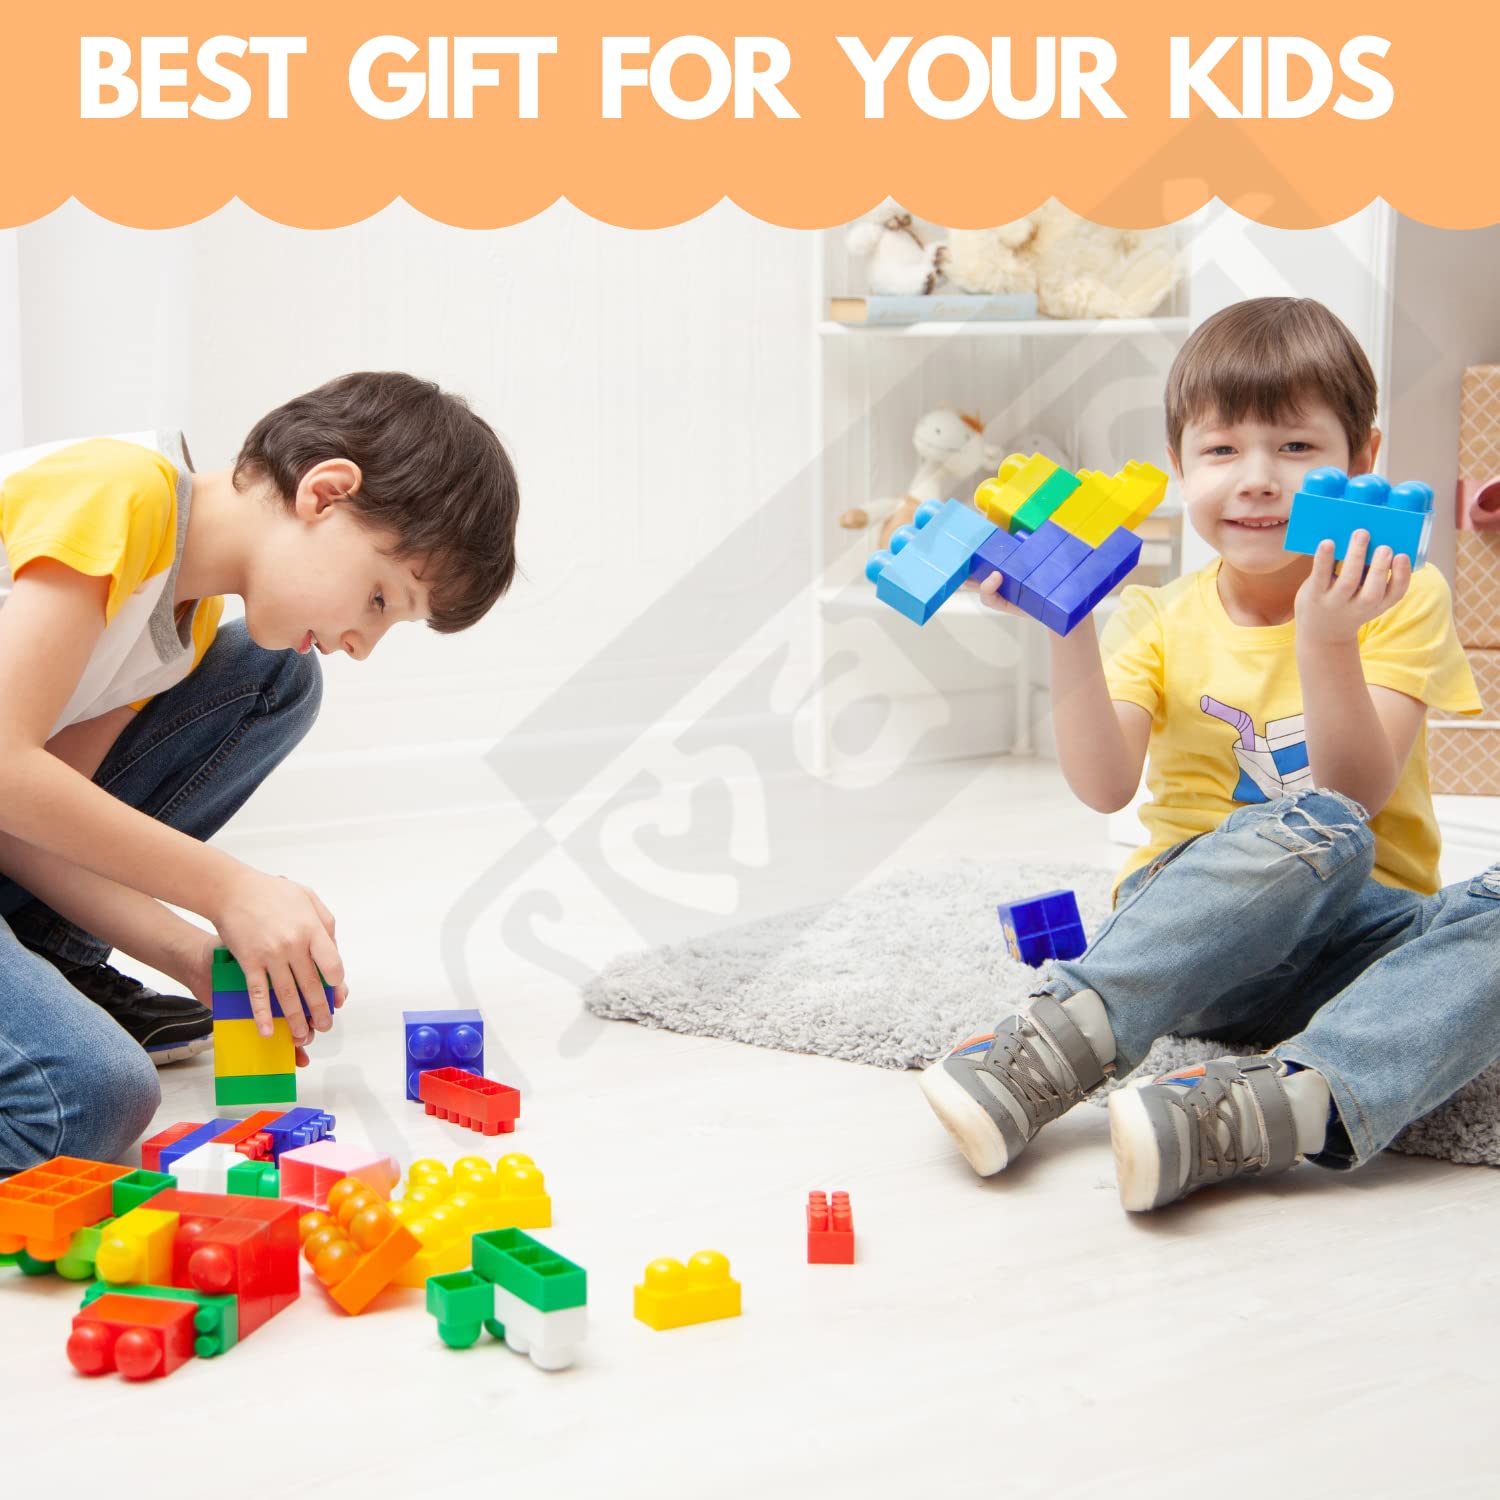 Kids Mandi block toys for all ages, boys, and girls.